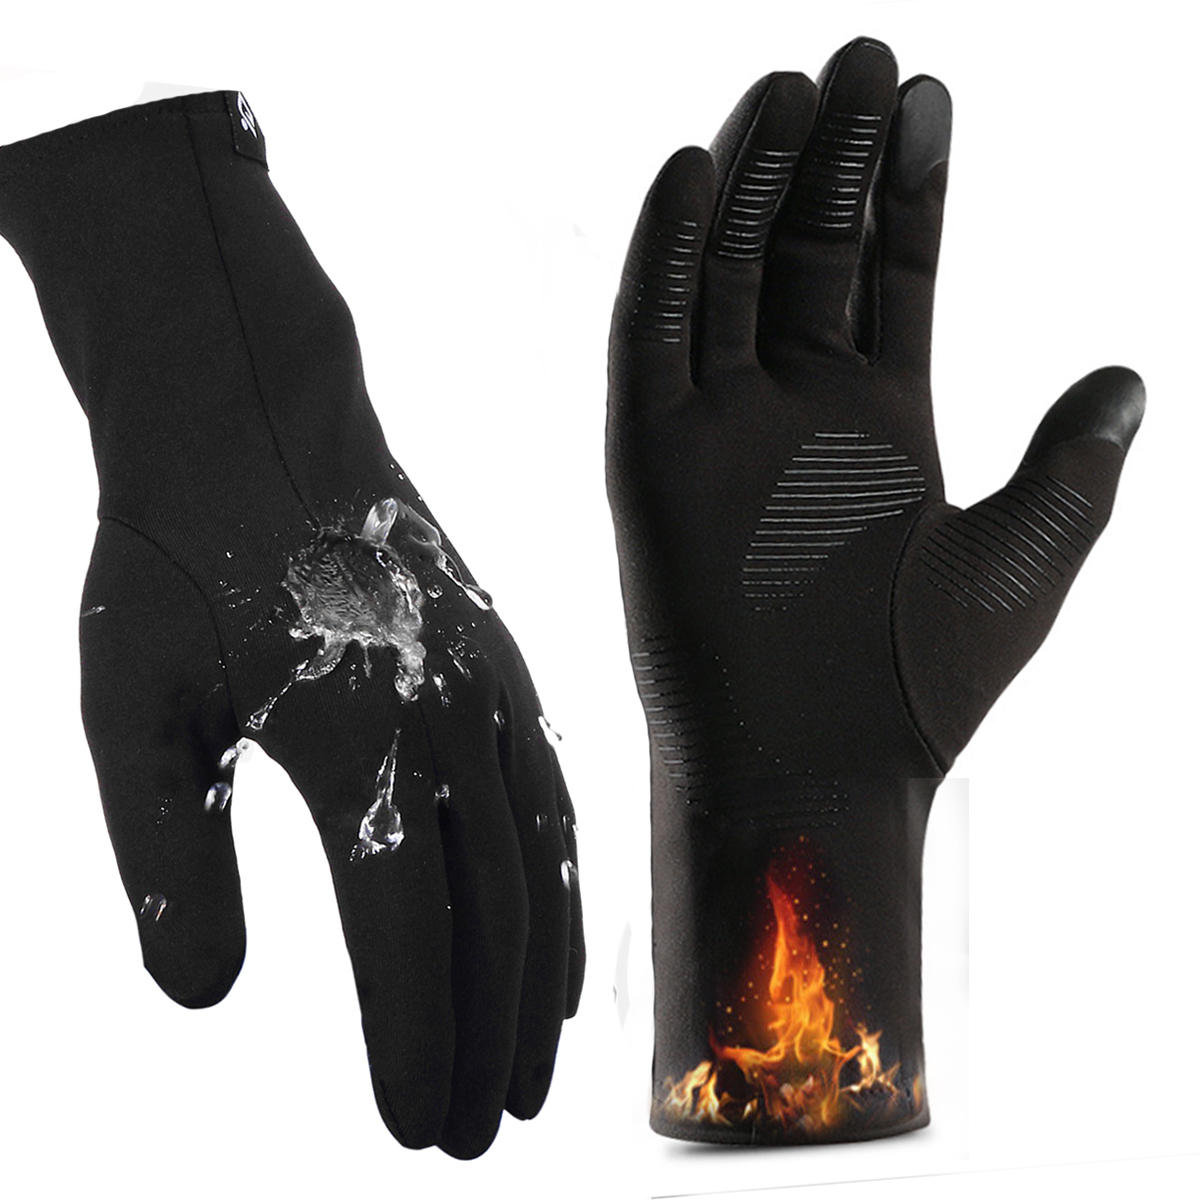 

Bakeey Light All Finger Touch Screen Gloves Windproof Anti-skid Winter Thickness Warm Outdoor Motorcycle Bicycle Riding